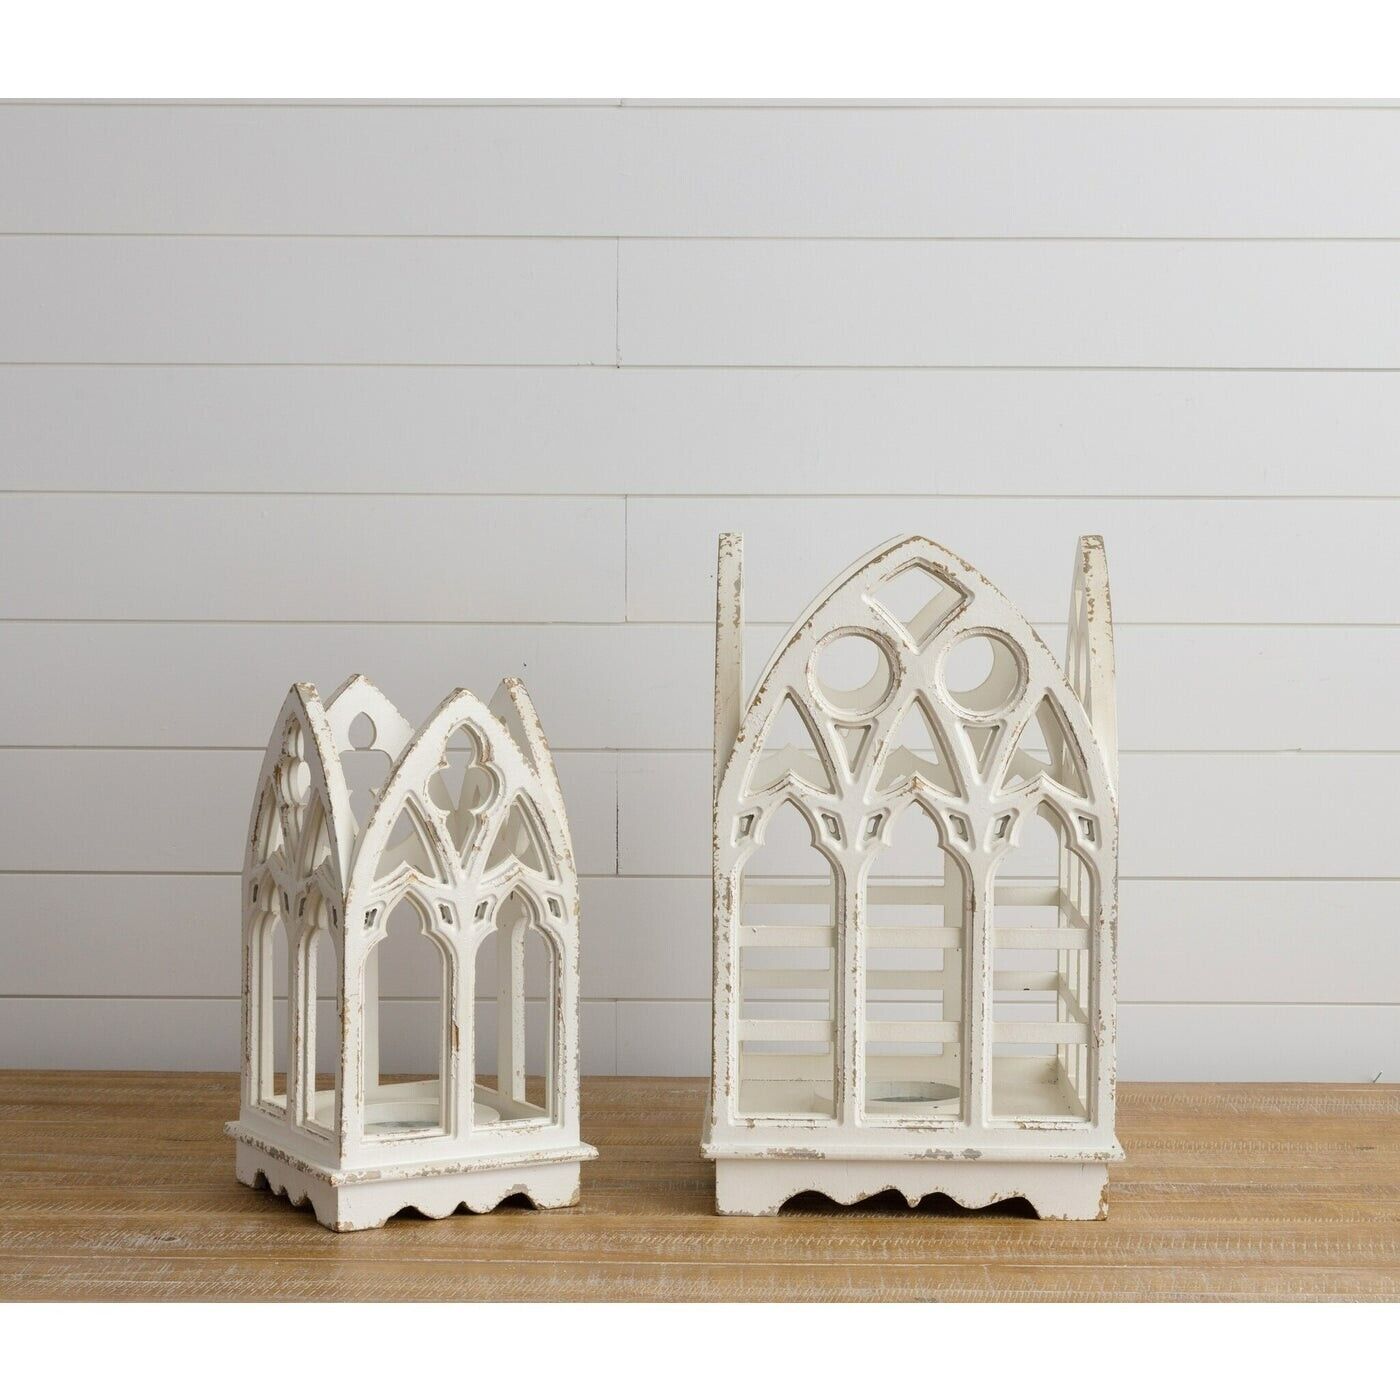 Primary image for Architectural Candle Holders in Distressed Wood and metal - 2